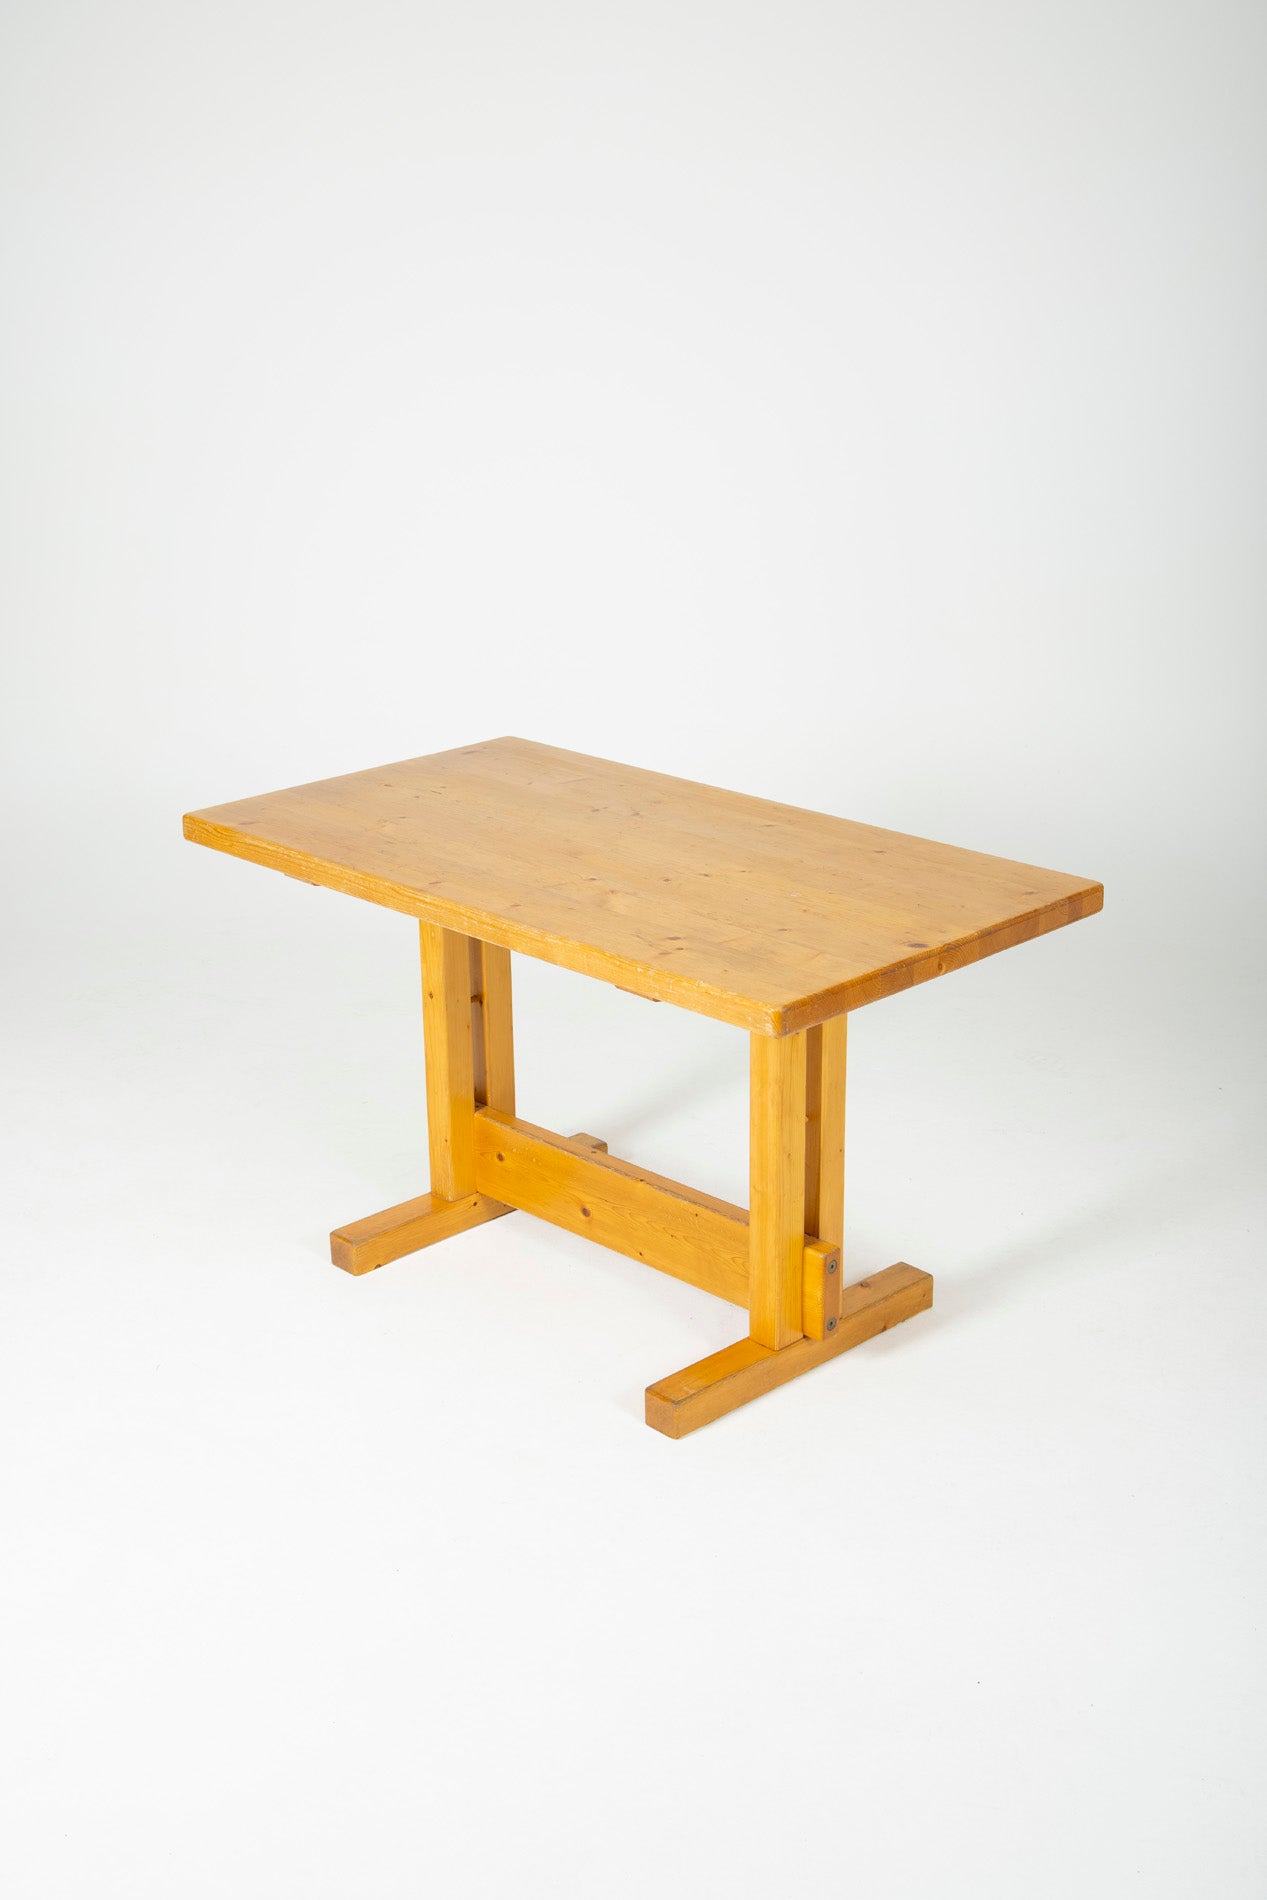 Les Arcs pine table by Charlotte Perriand